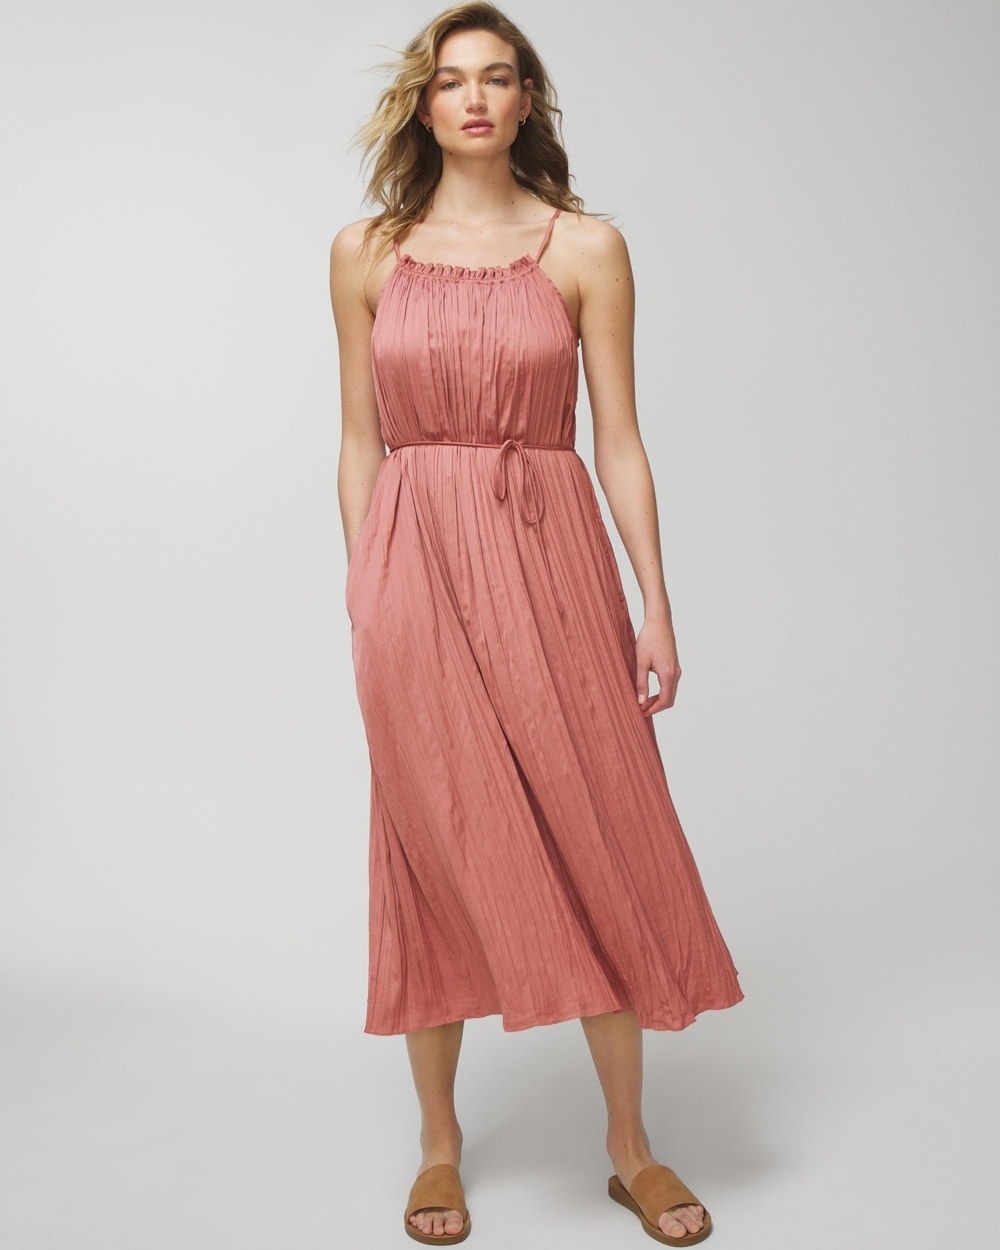 Soma Women's Satin Pleated Midi Sundress With Built-in Bra In Pink Size 2xl |